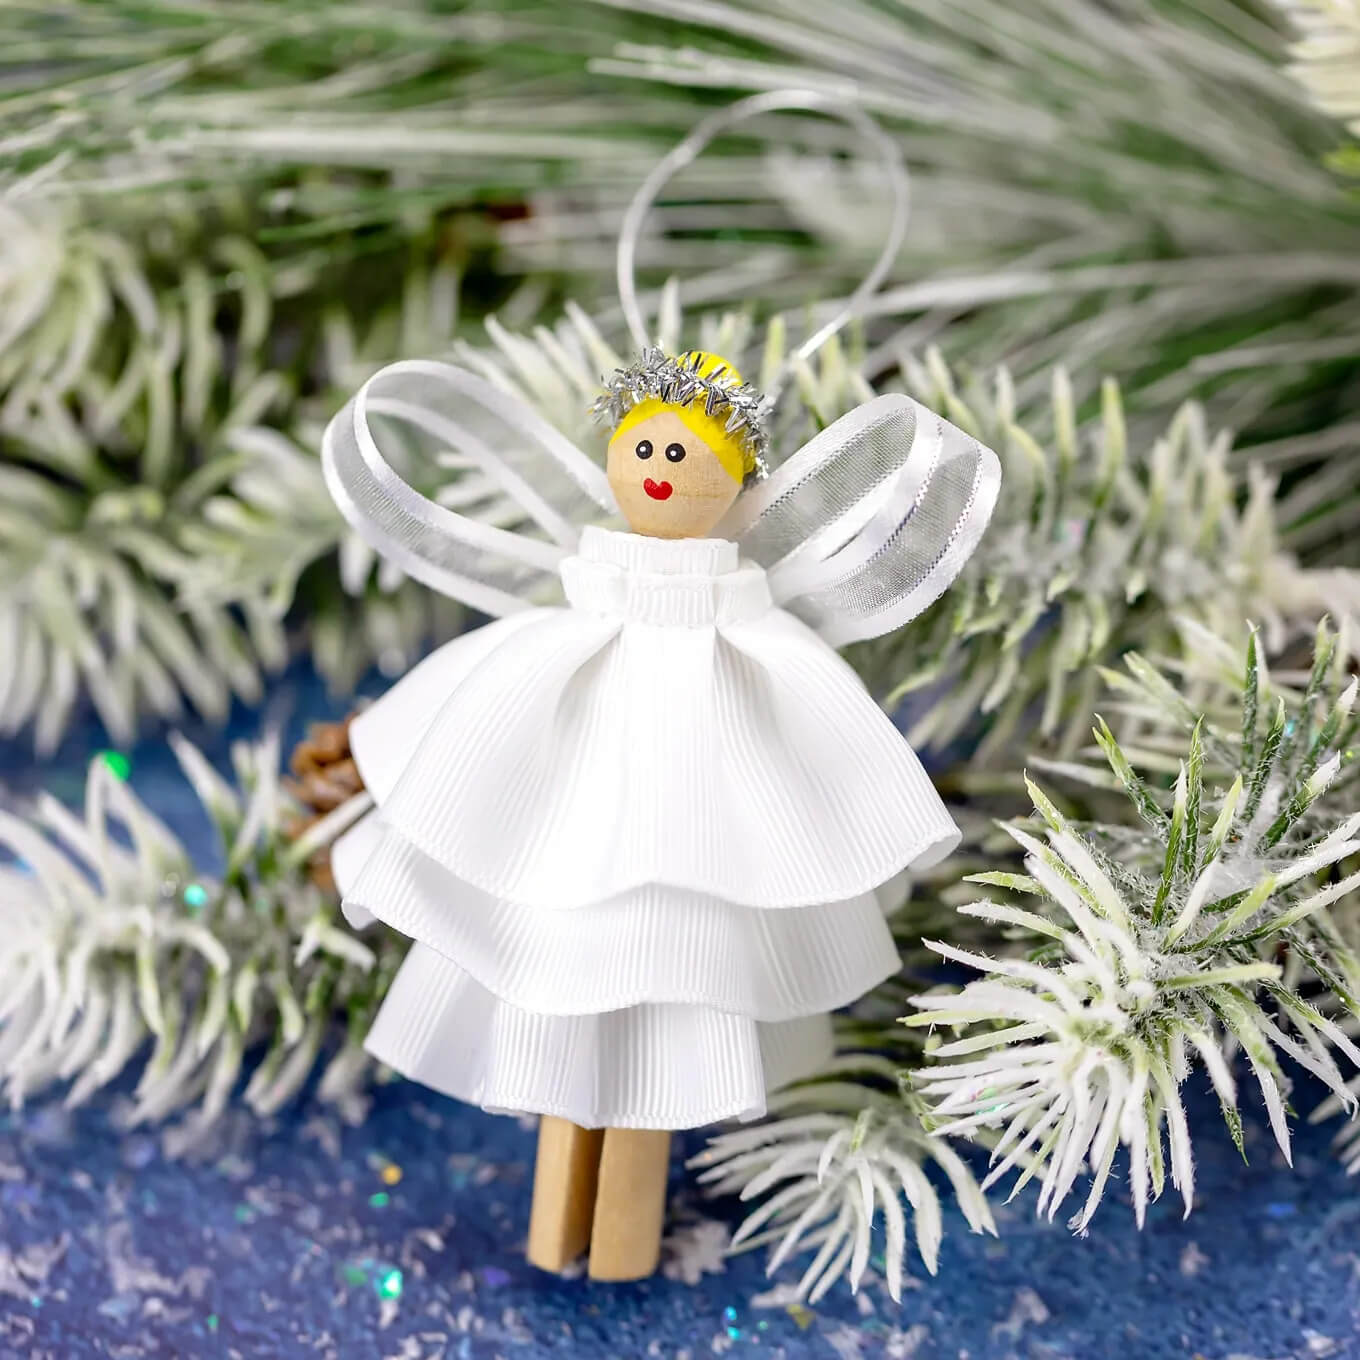 Beautiful Clothespin Angel Crafts For KidsClothespin Angel Crafts For Kids